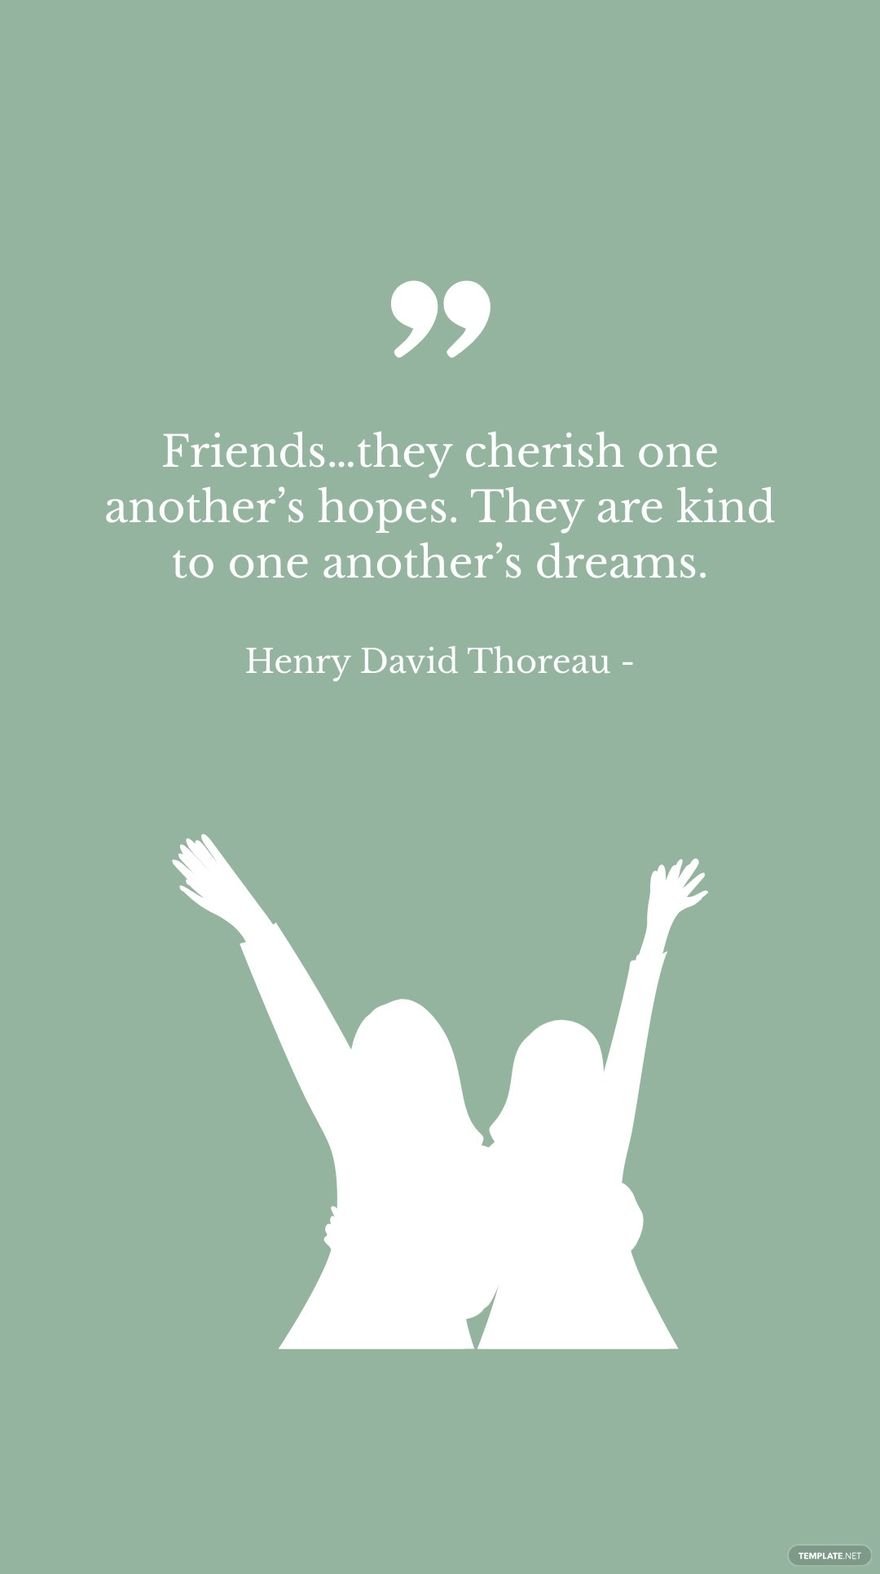 Henry David Thoreau - Friends…they cherish one another’s hopes. They are kind to one another’s dreams.